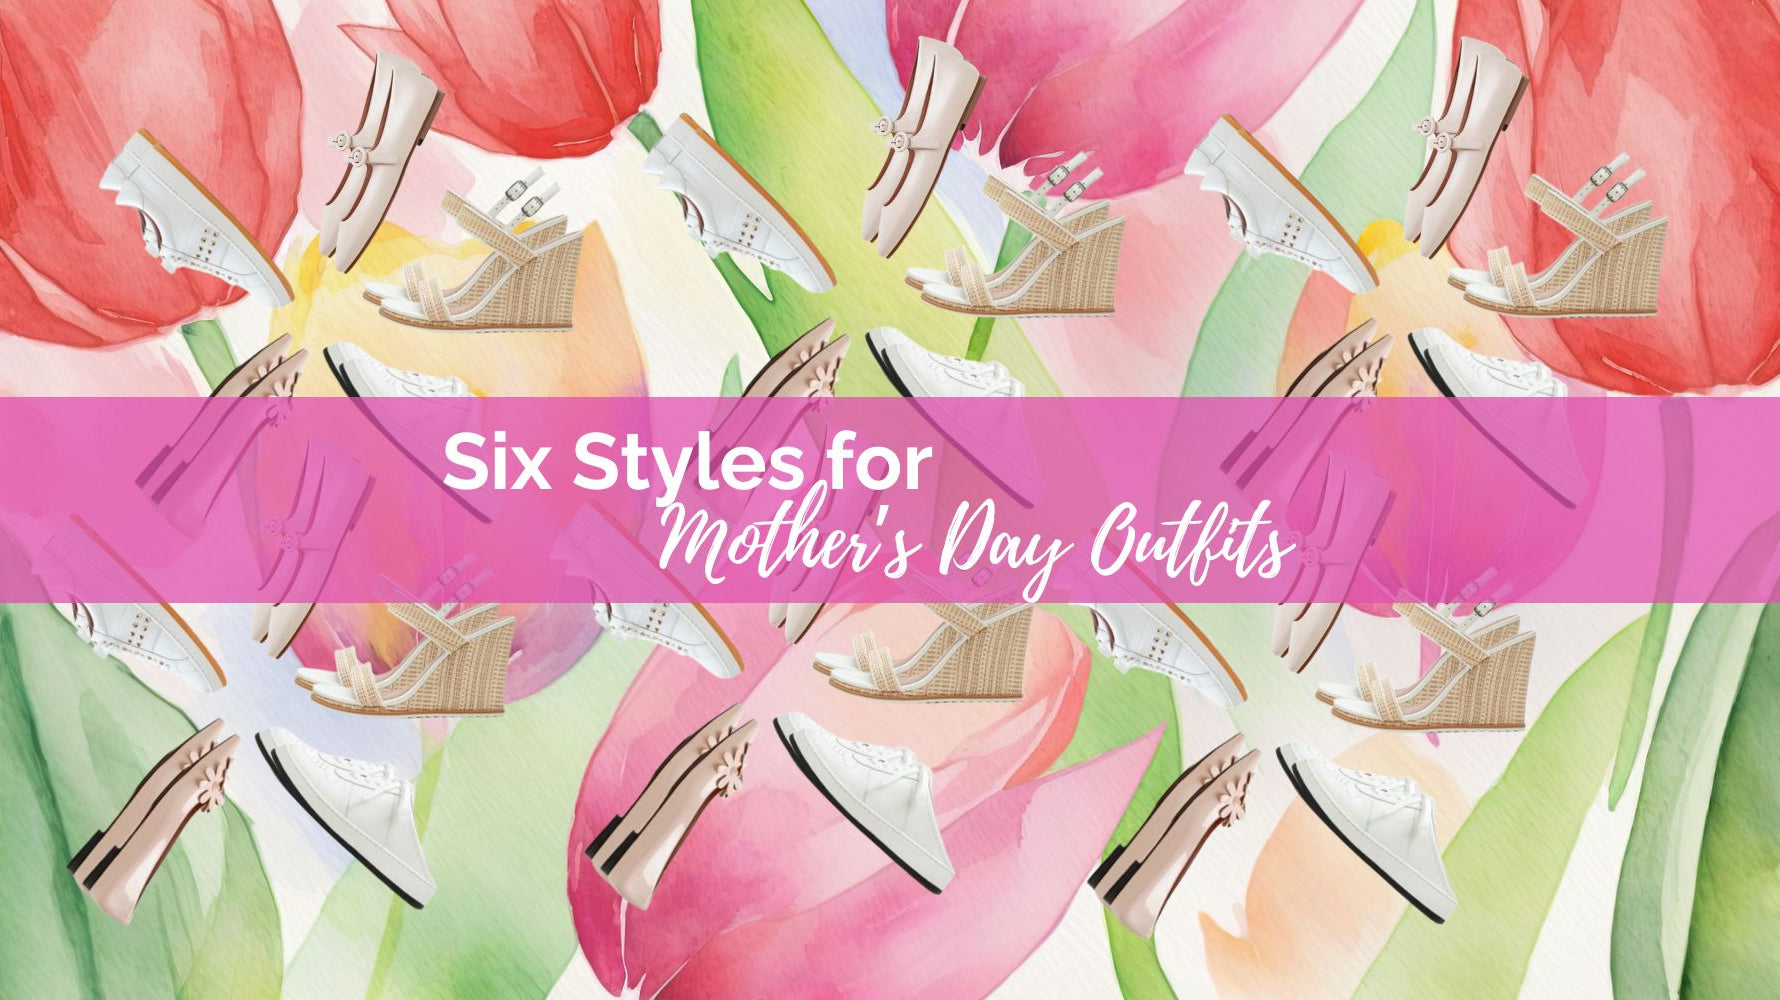 Six Styles for Mother's Day Outfits